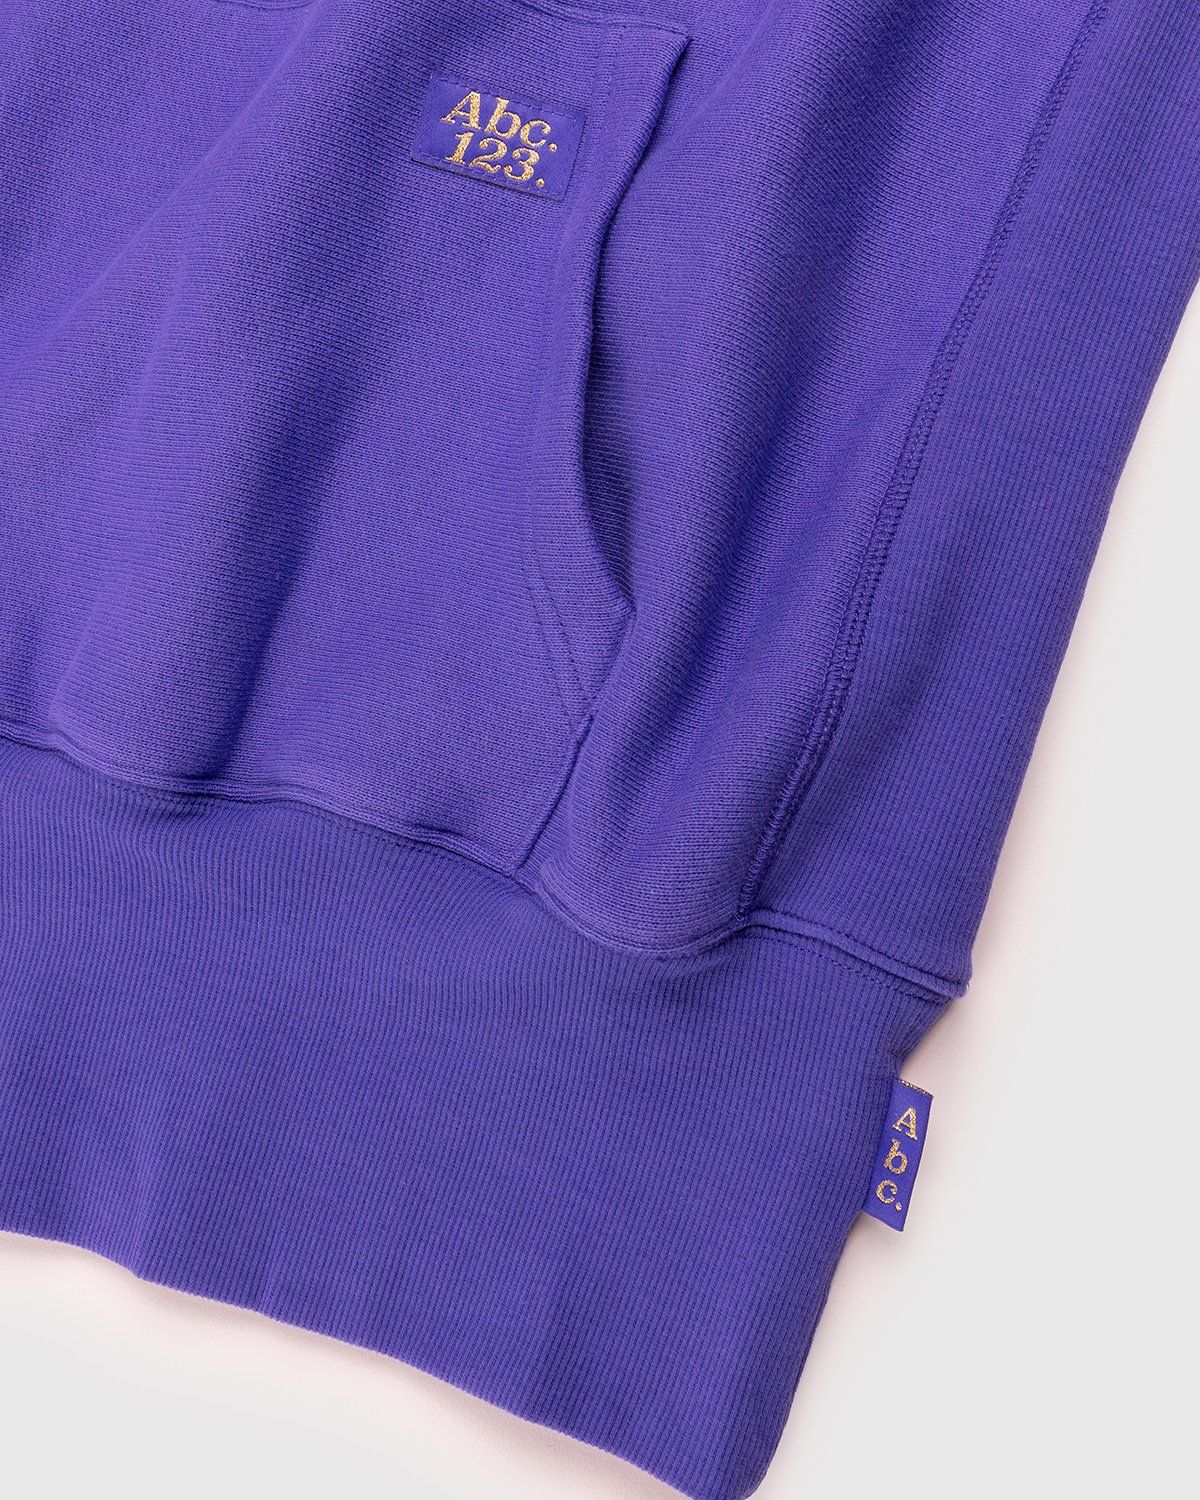 Abc. – Pullover Hoodie Sapphire - Sweats - Blue - Image 3